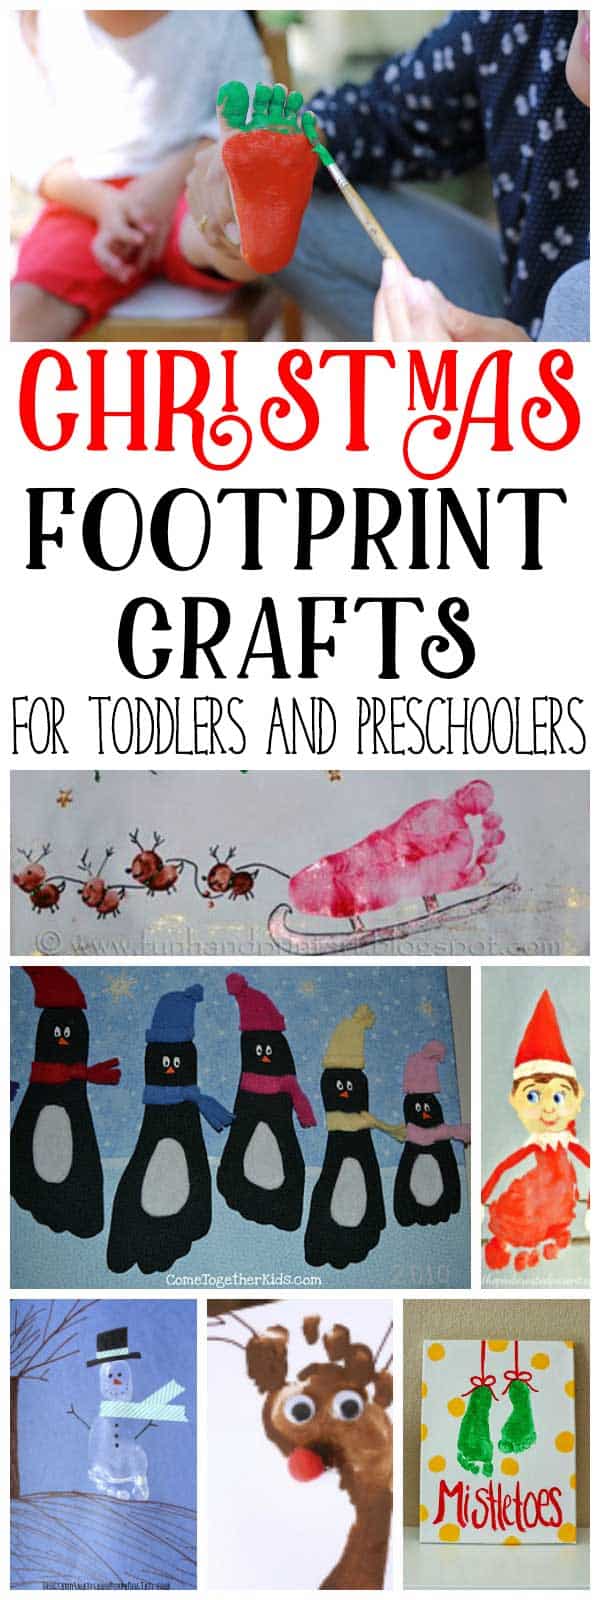 Fun Christmas footprint crafts and pictures to make with toddlers and preschoolers as you countdown to Christmas and get creative together.